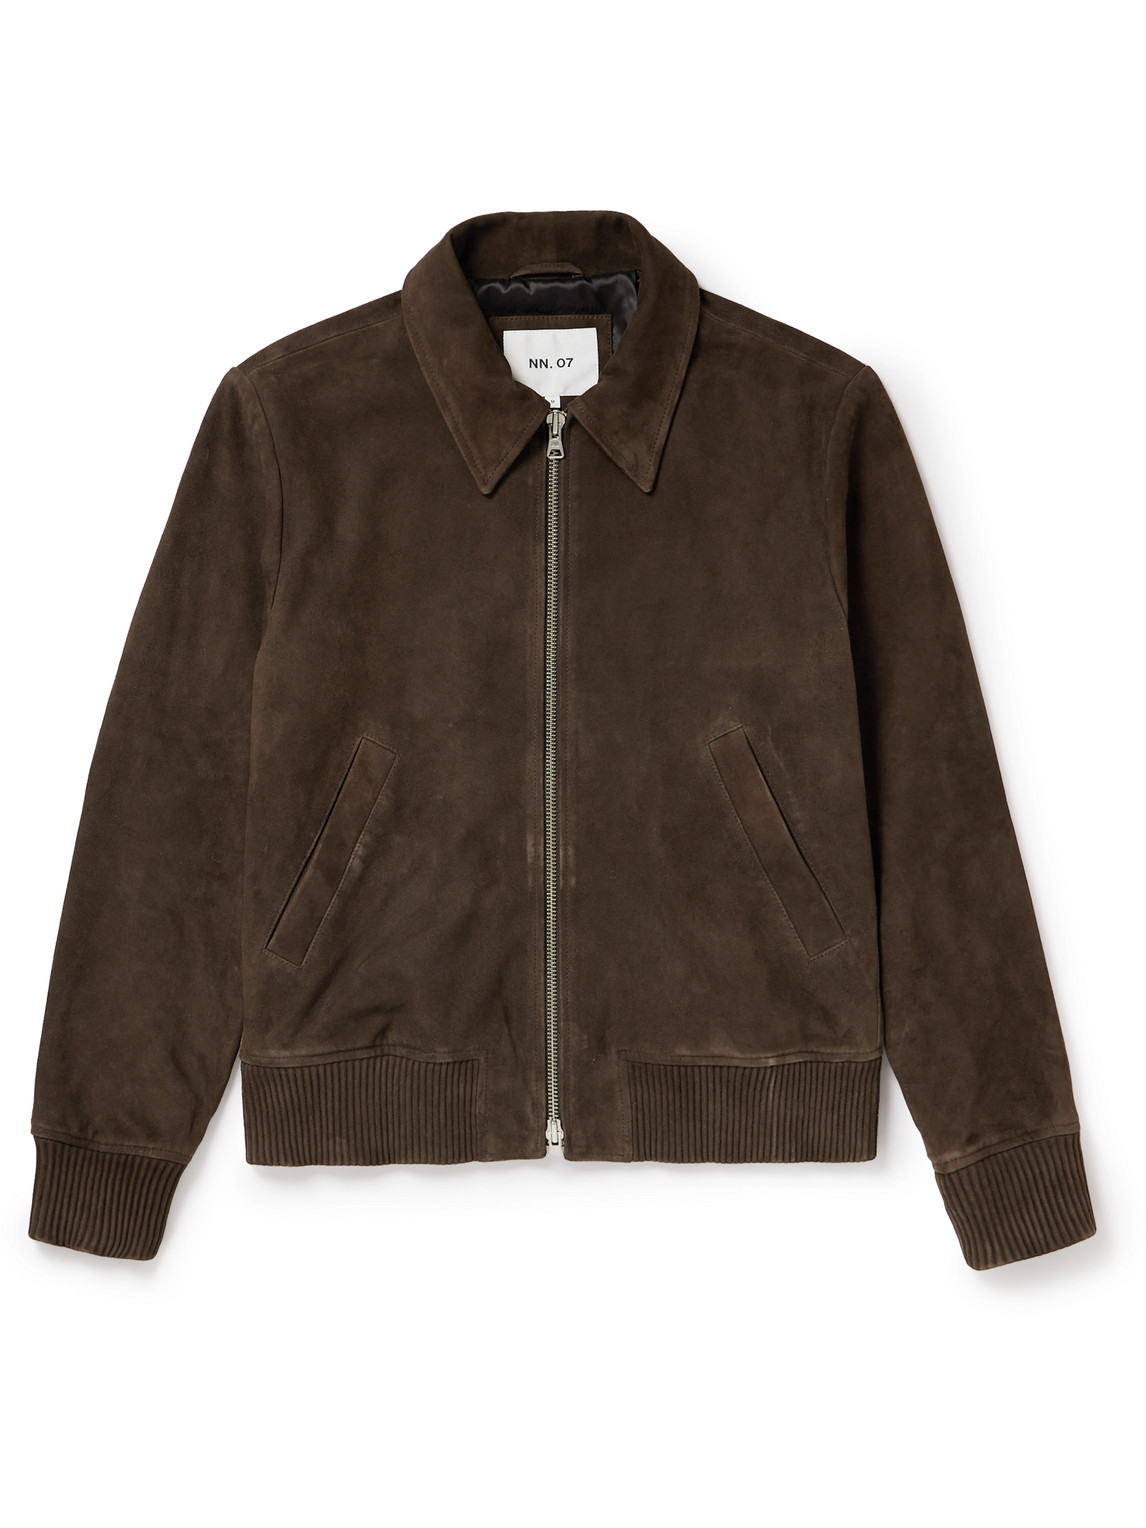 Throwing Fits Florian Suede Jacket